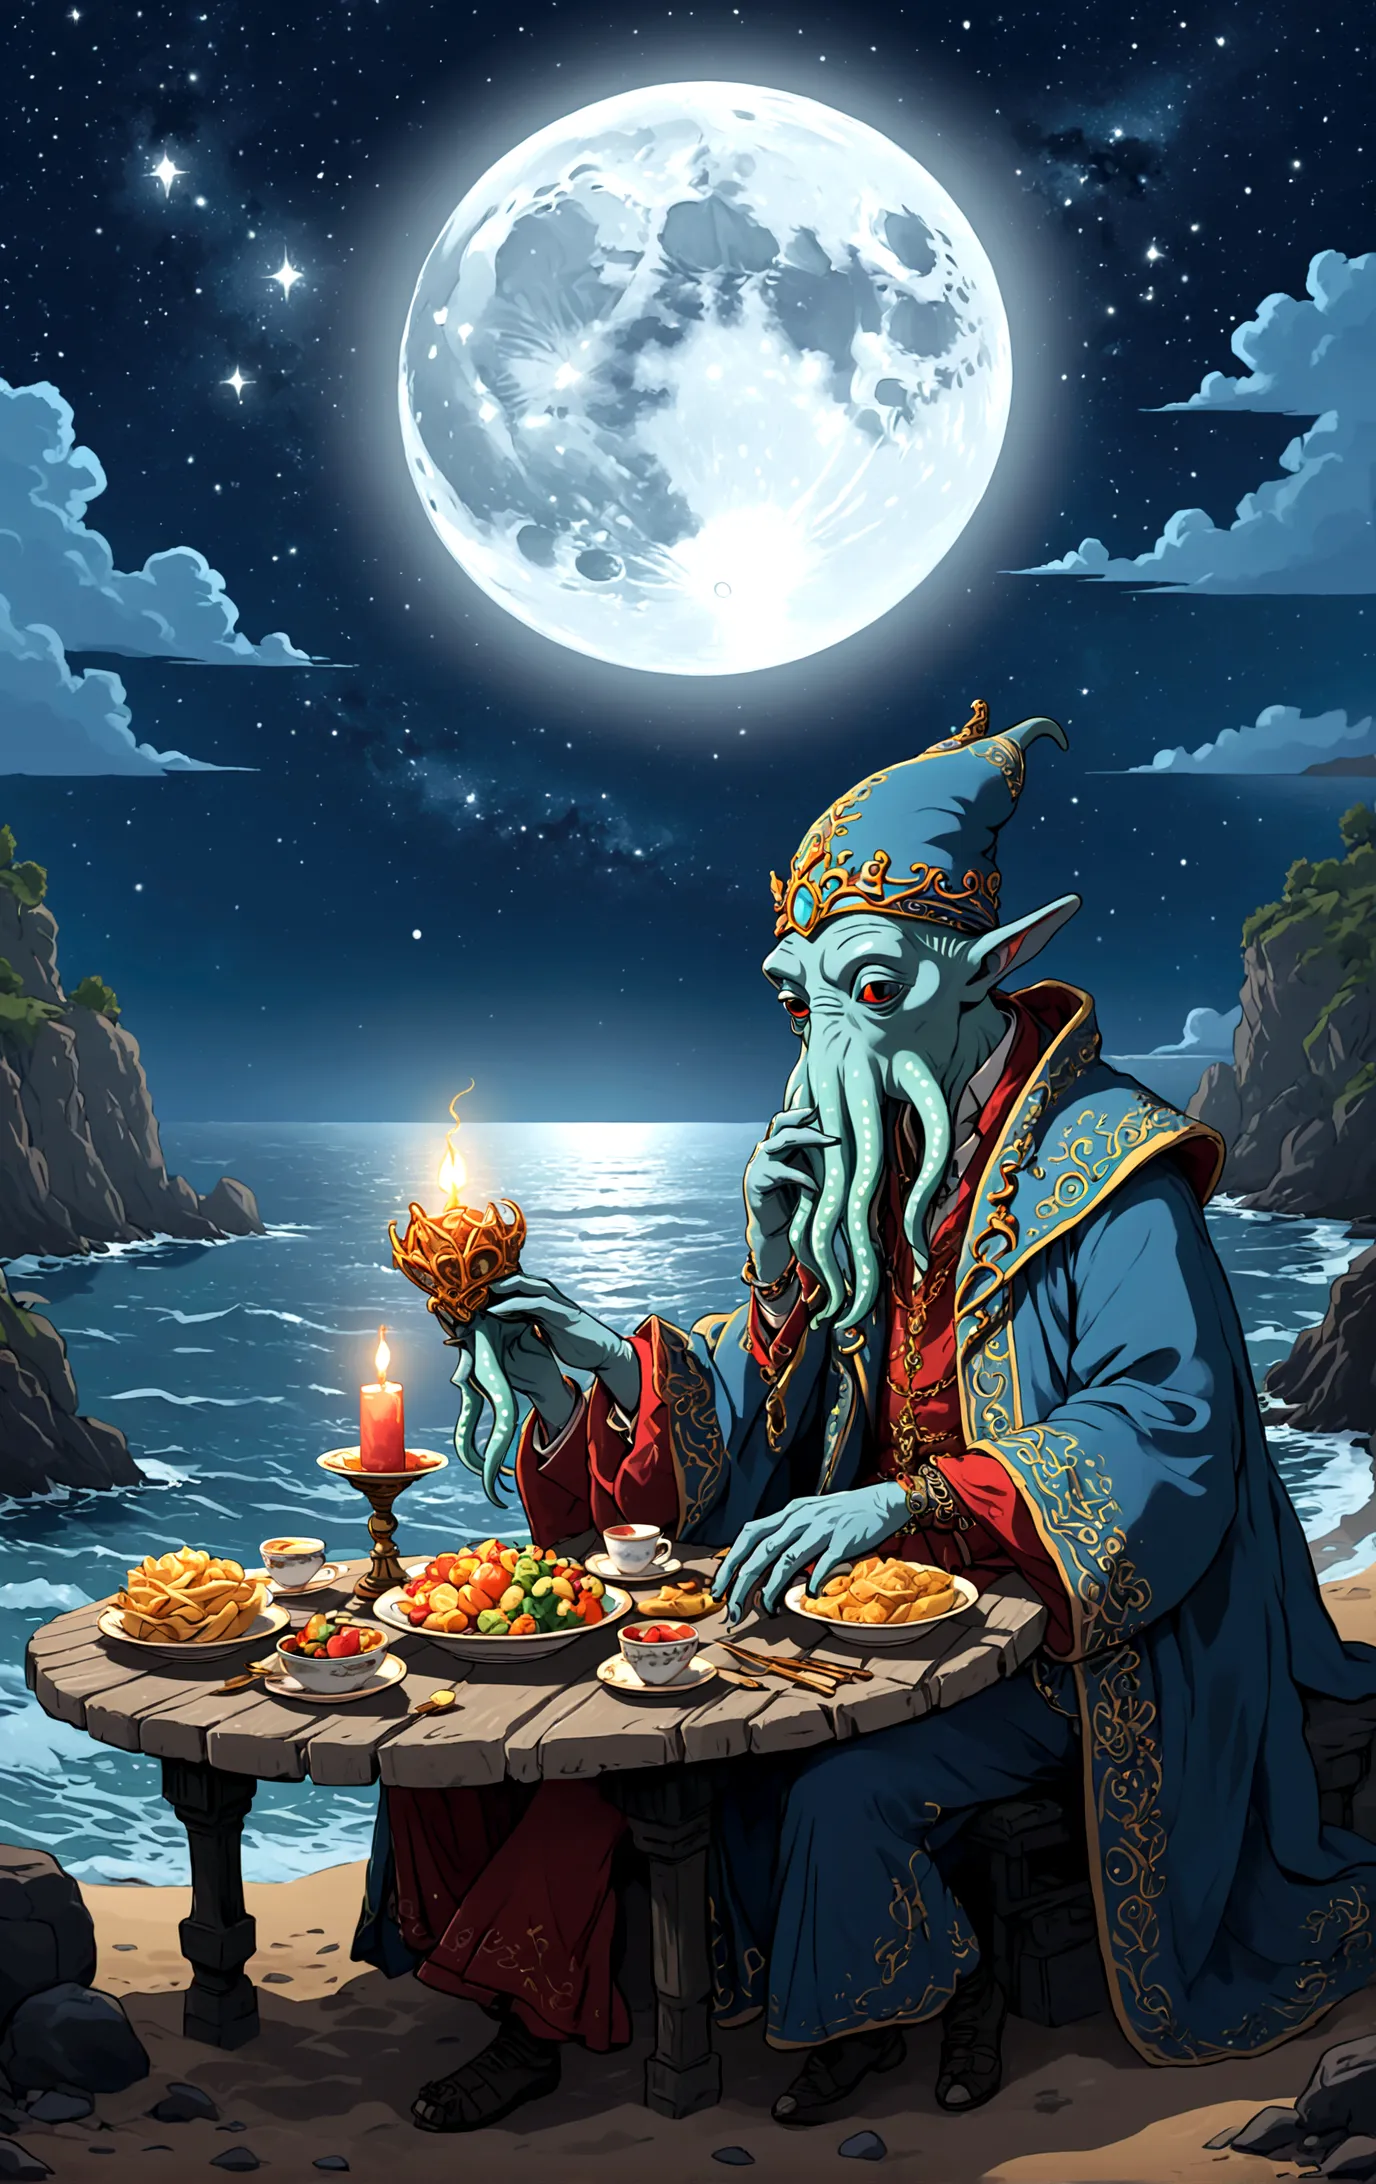 Moonlight on the rocky shore２Illuminate the head-to-body Cthulhu, , Summer dreams under the stars, Russian tableware, From the s...